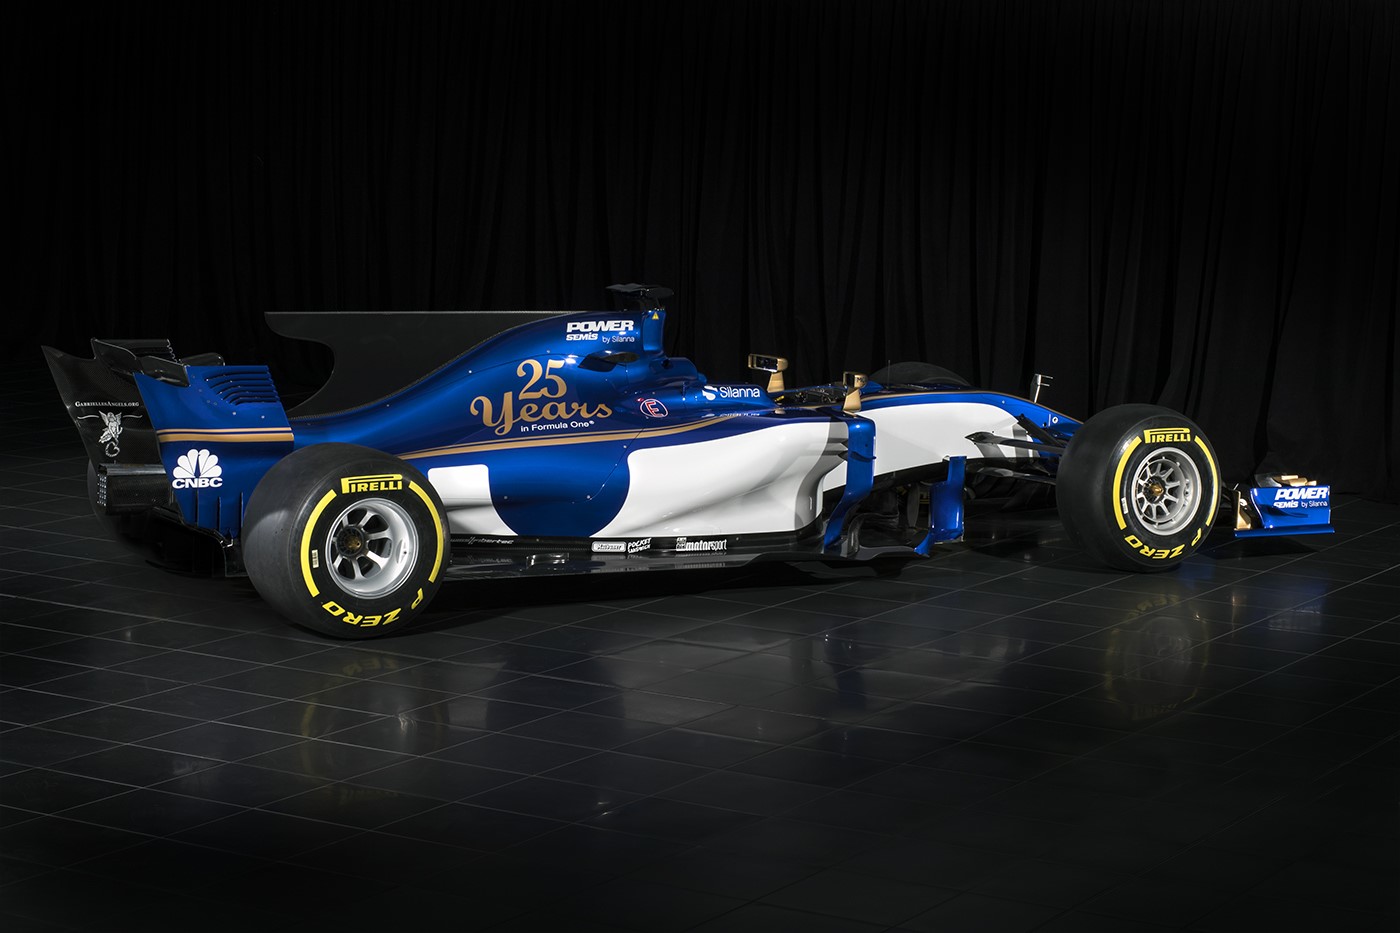 Sauber launched their 2017 car today. See separate story on home page to follow